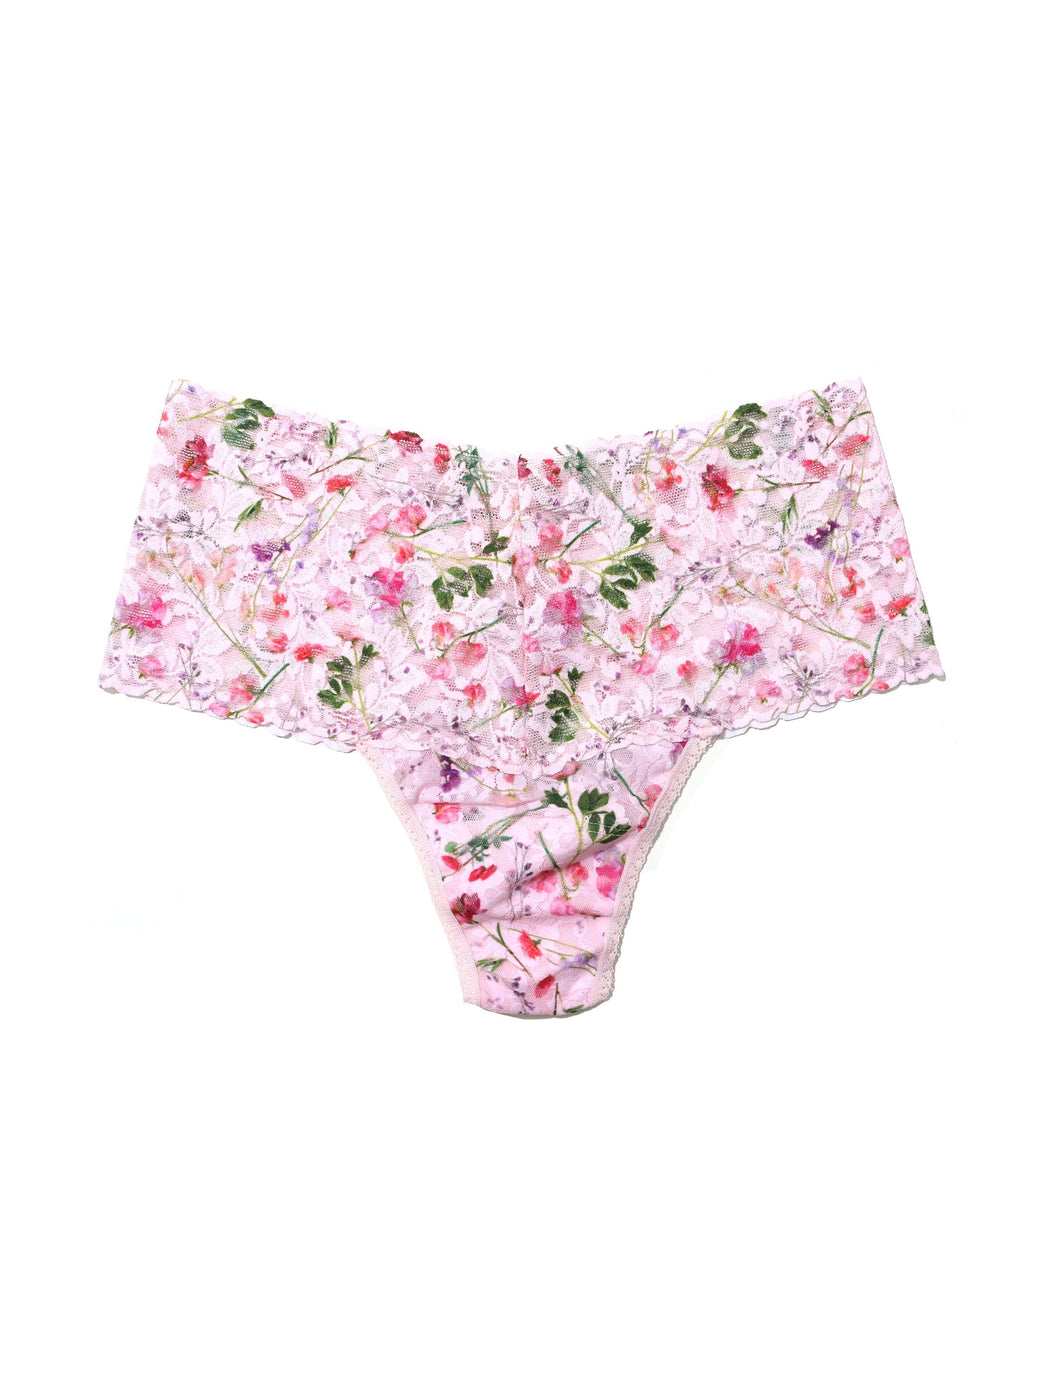 Printed Retro Lace Thong Rise And Vines Sale